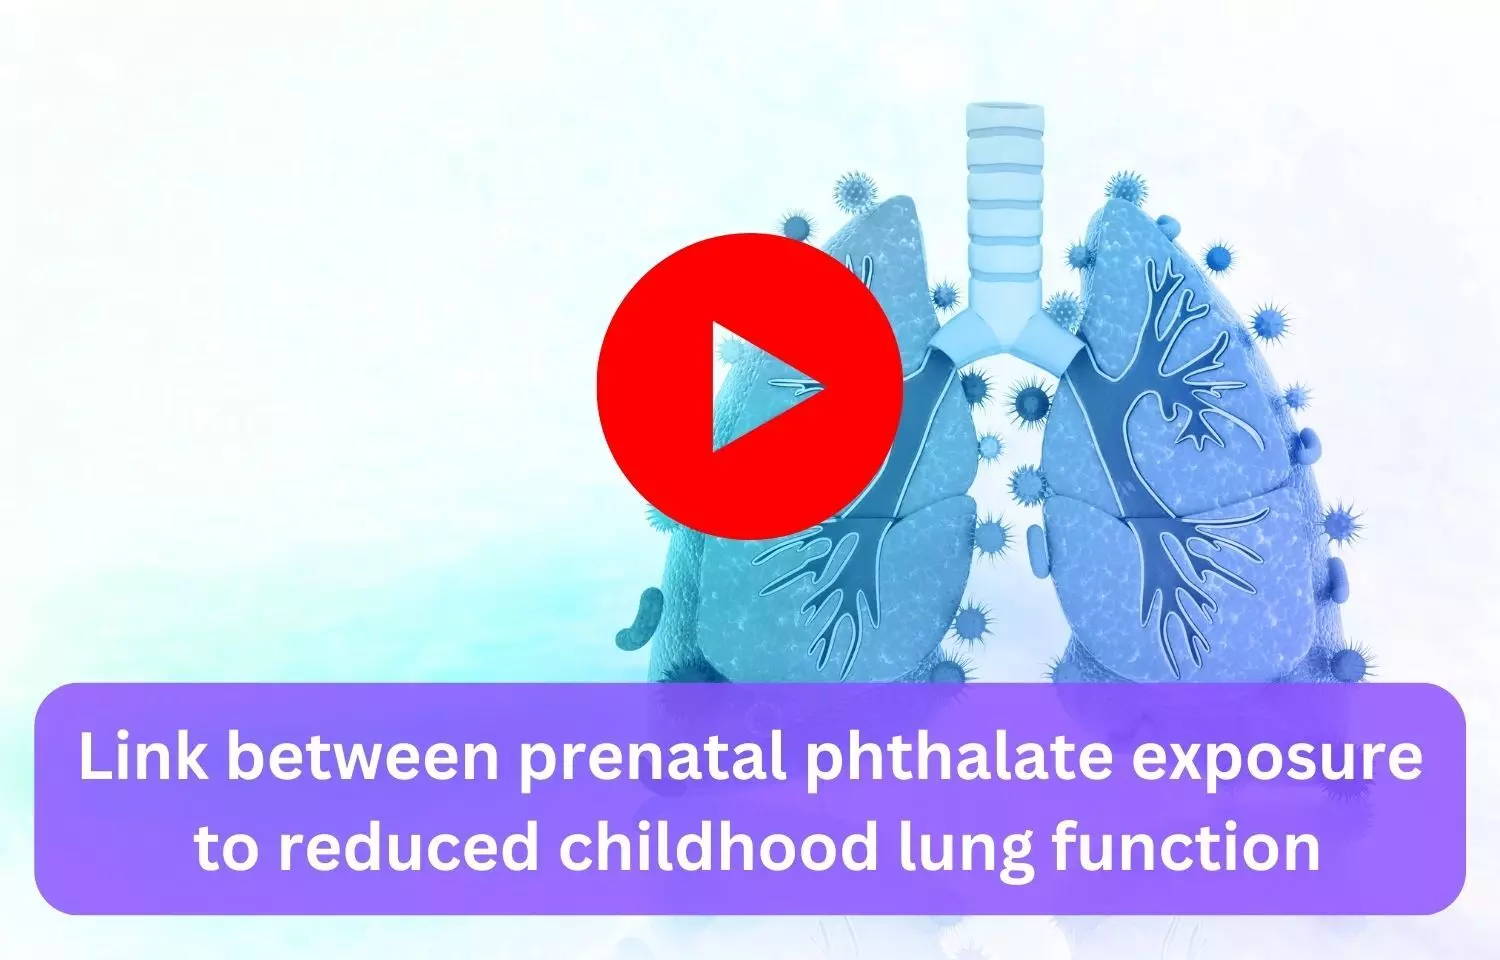 Link between prenatal phthalate exposure to reduced childhood lung function